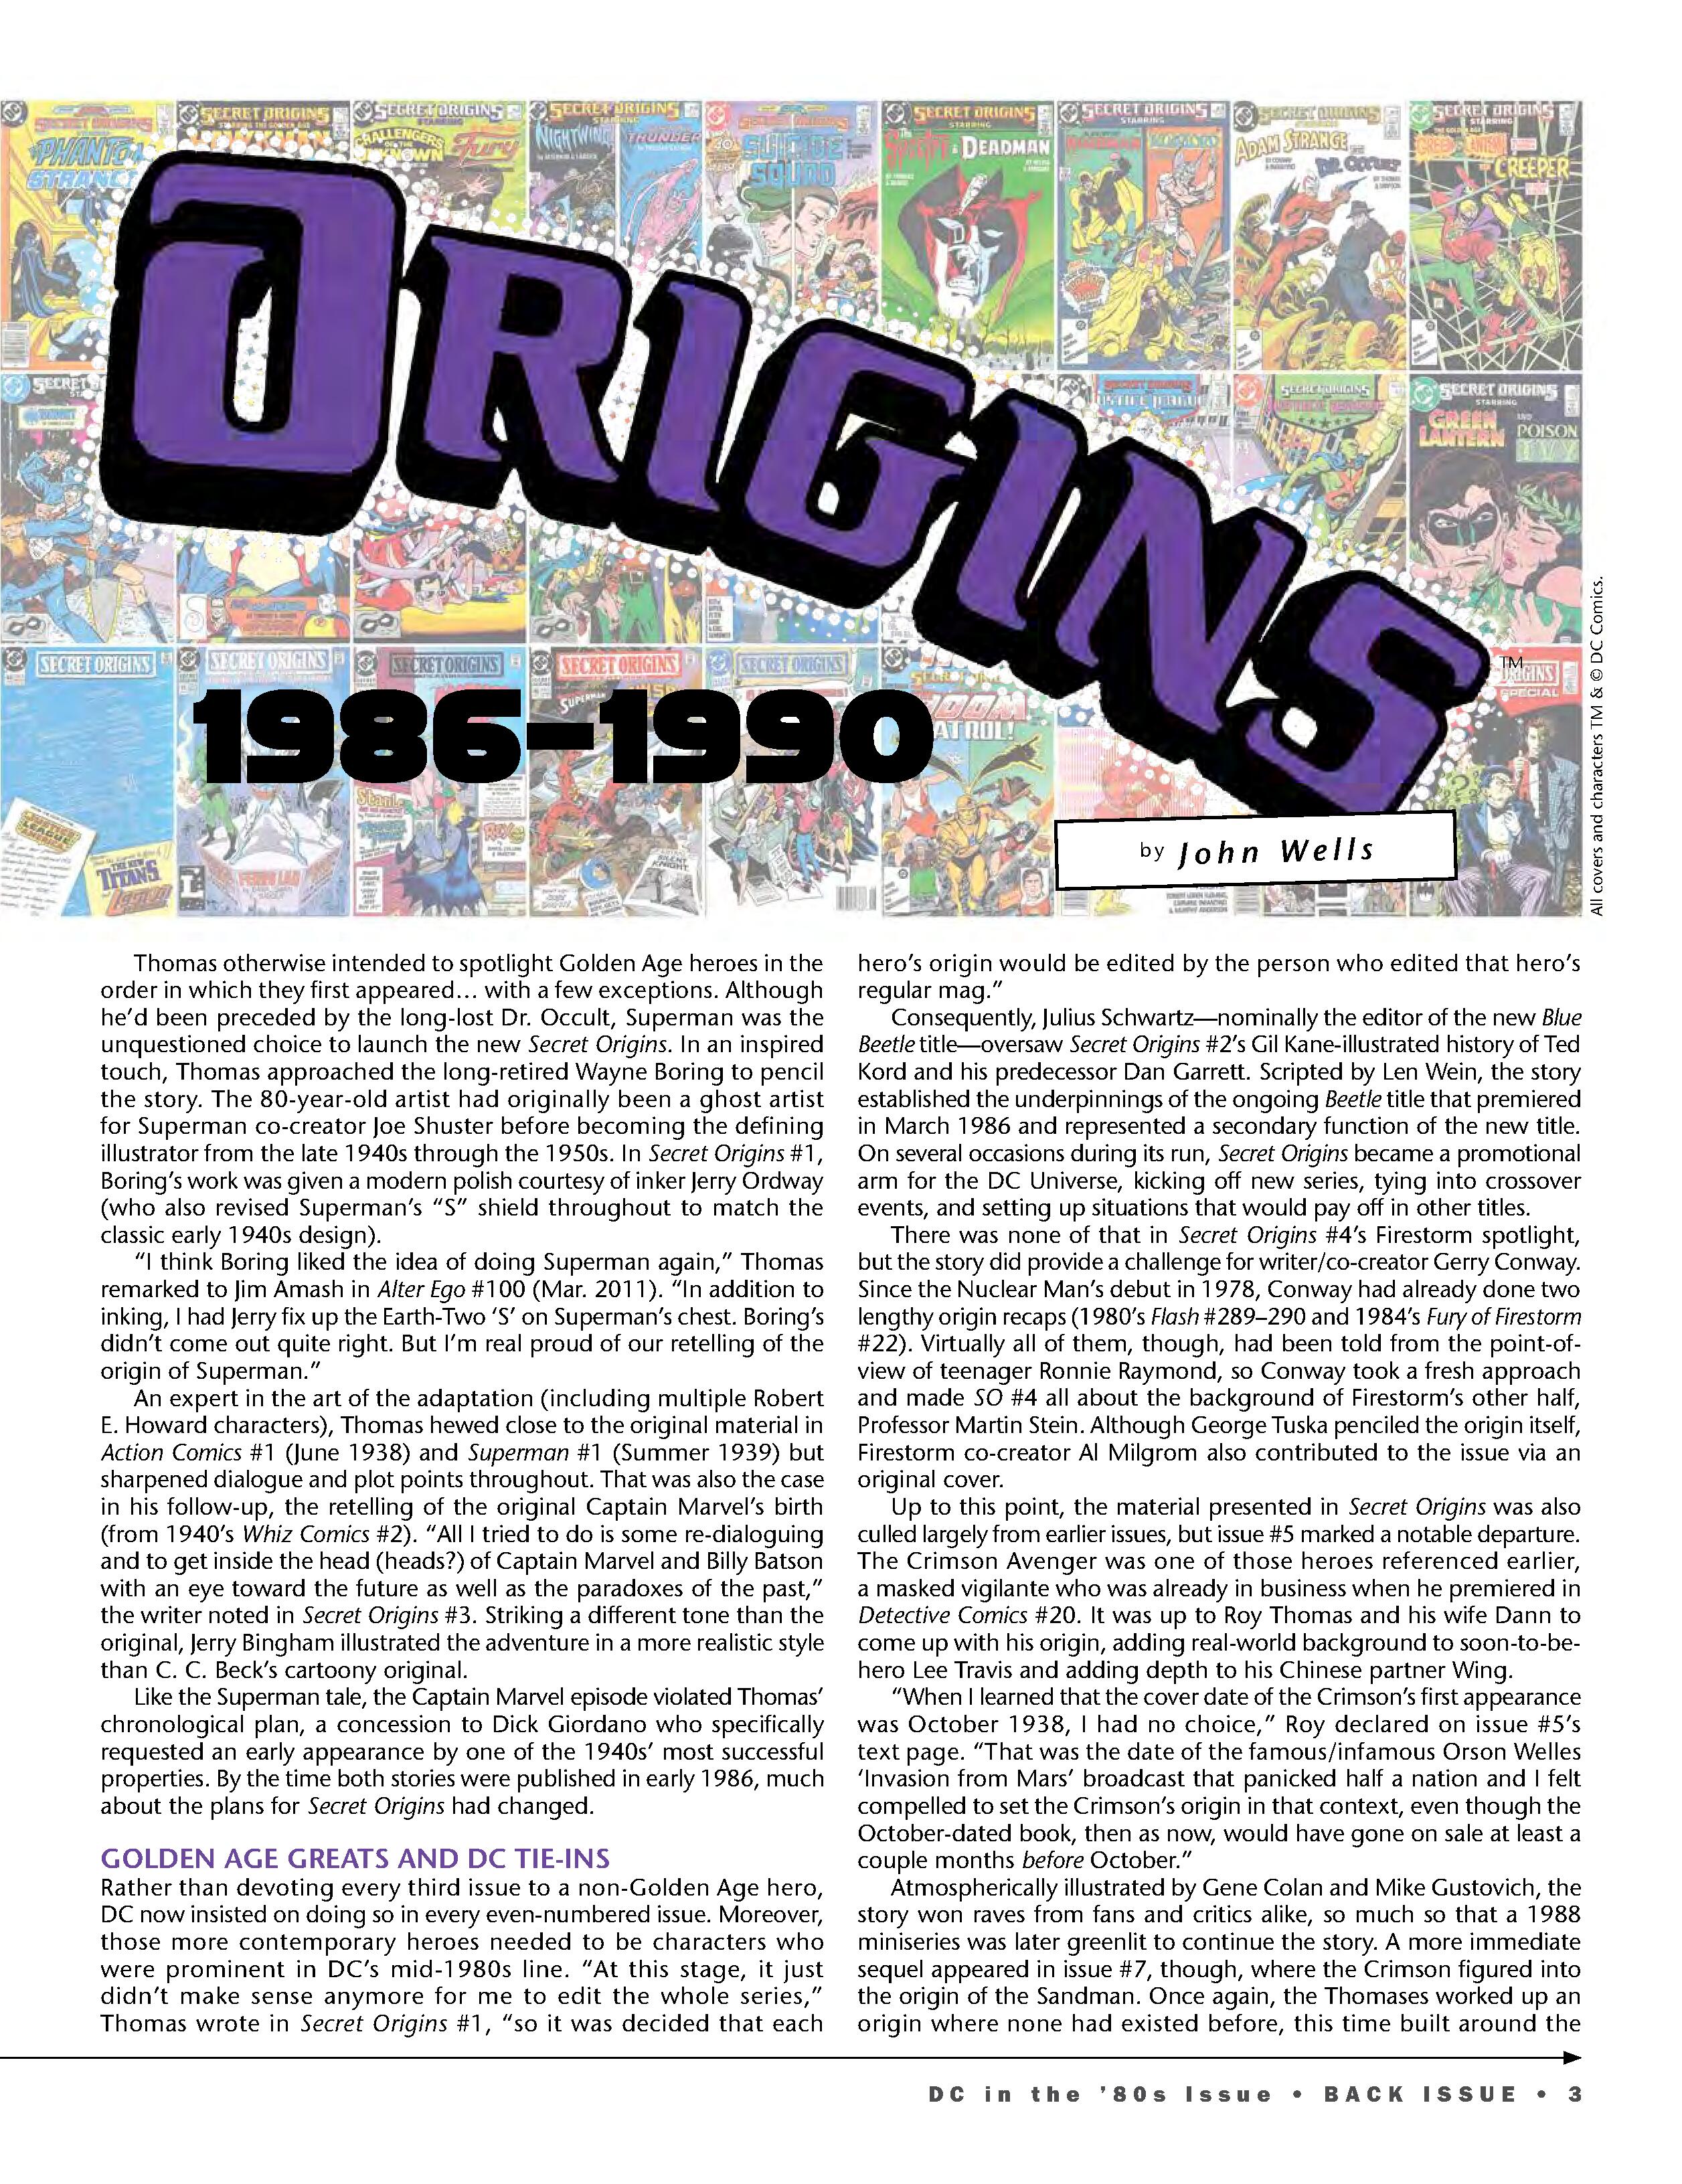 Read online Back Issue comic -  Issue #98 - 5